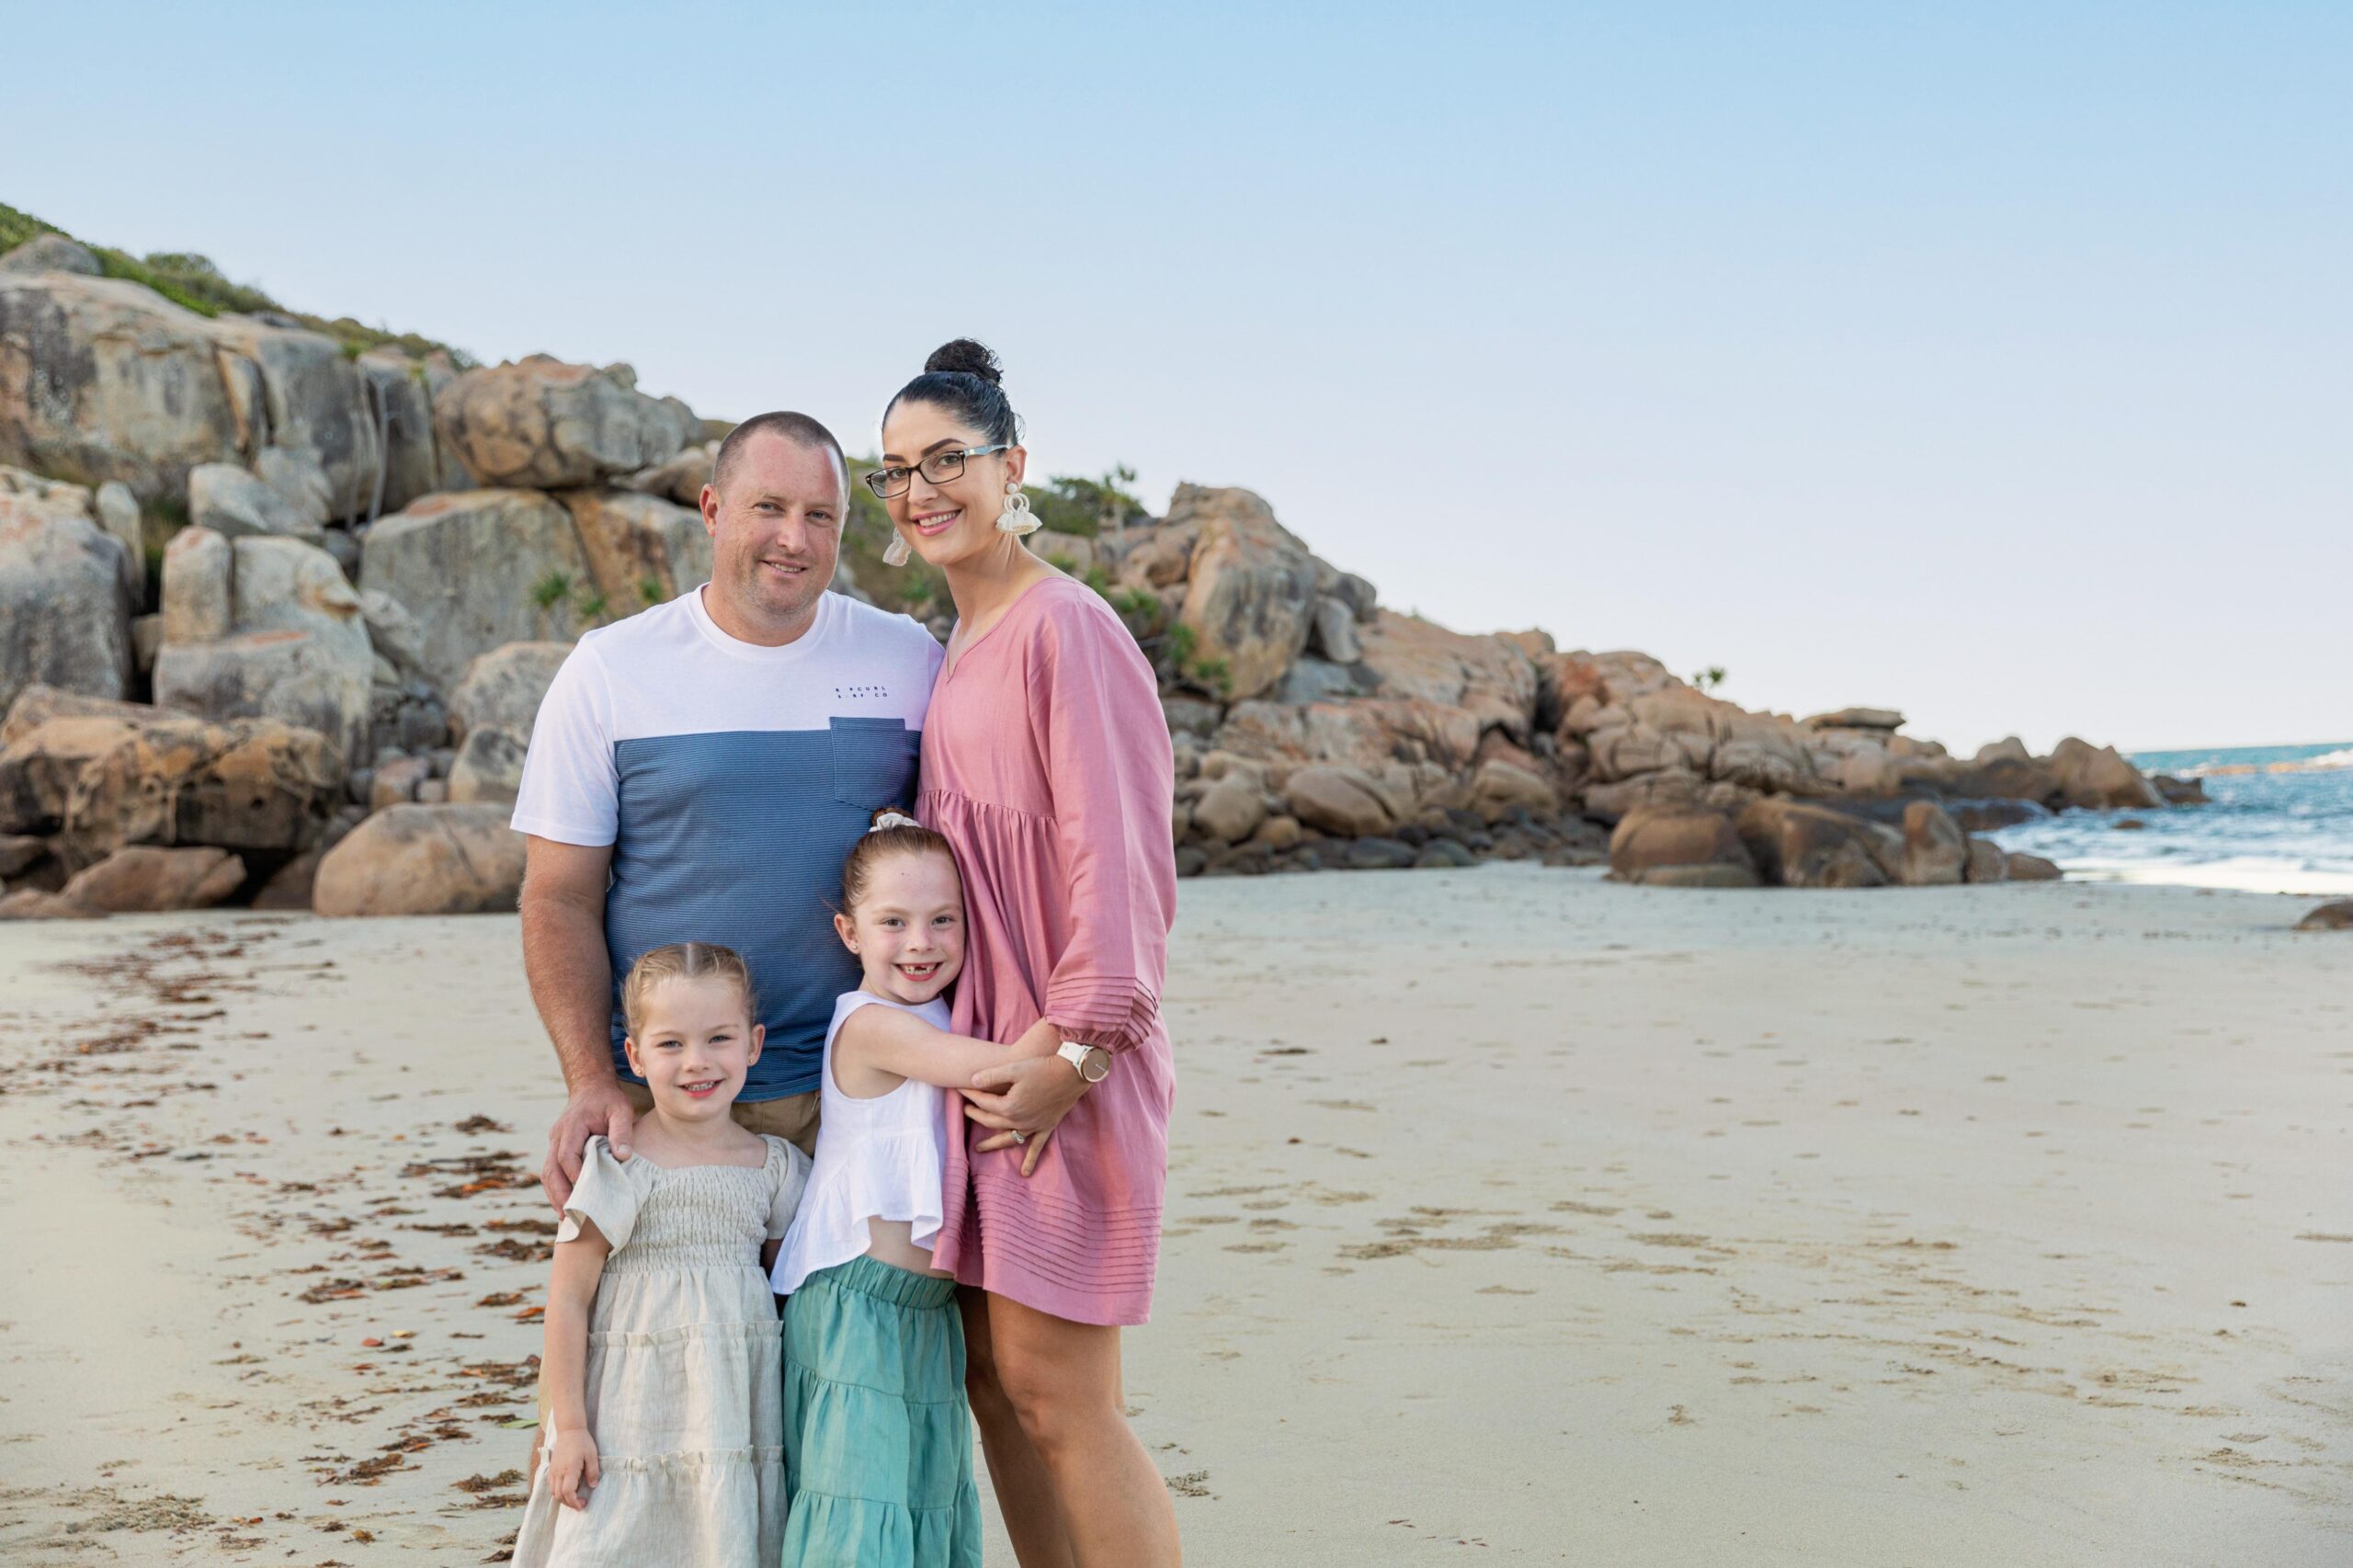 Mum, Dad and their two girls are Rose Bay at Sunset for a family photo session